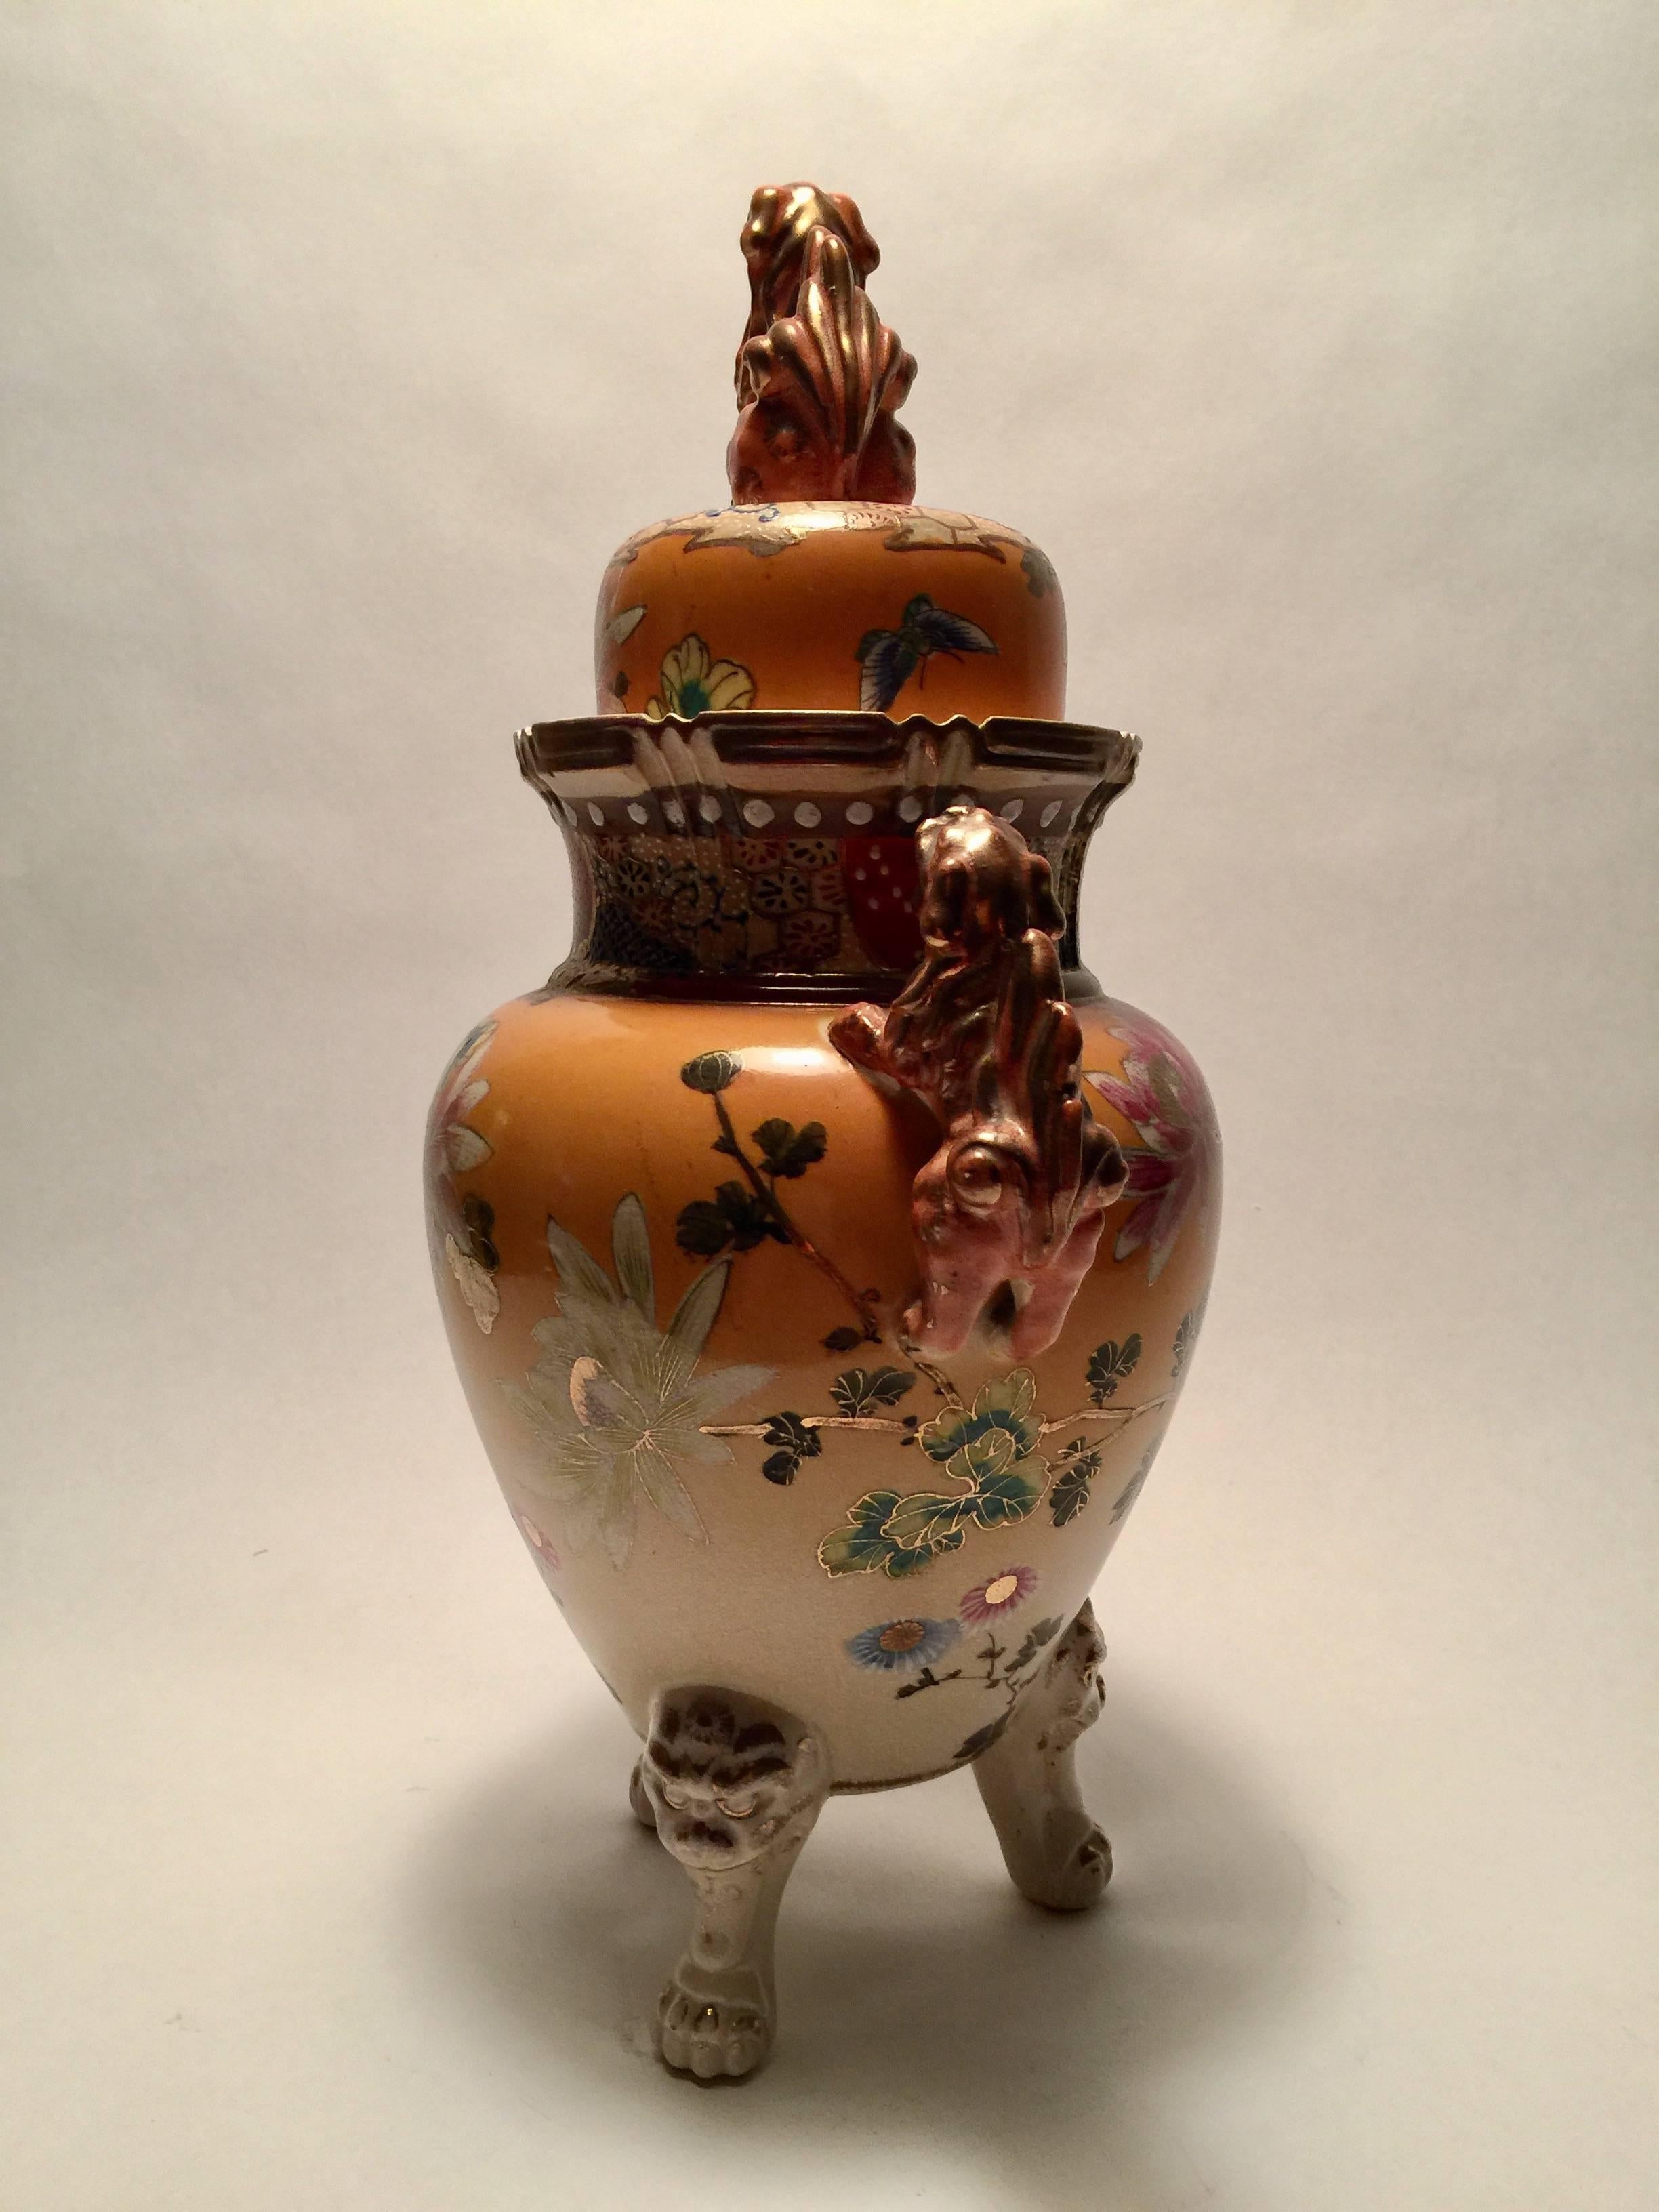 Typical of Early Satsuma pottery, usually hand-painted by women, this three legged censor is beautifully decorated with asymmetrical flowers. The ombre shading done in a fantastic yellow orange color serves to set off the flowers painted in fuchsia